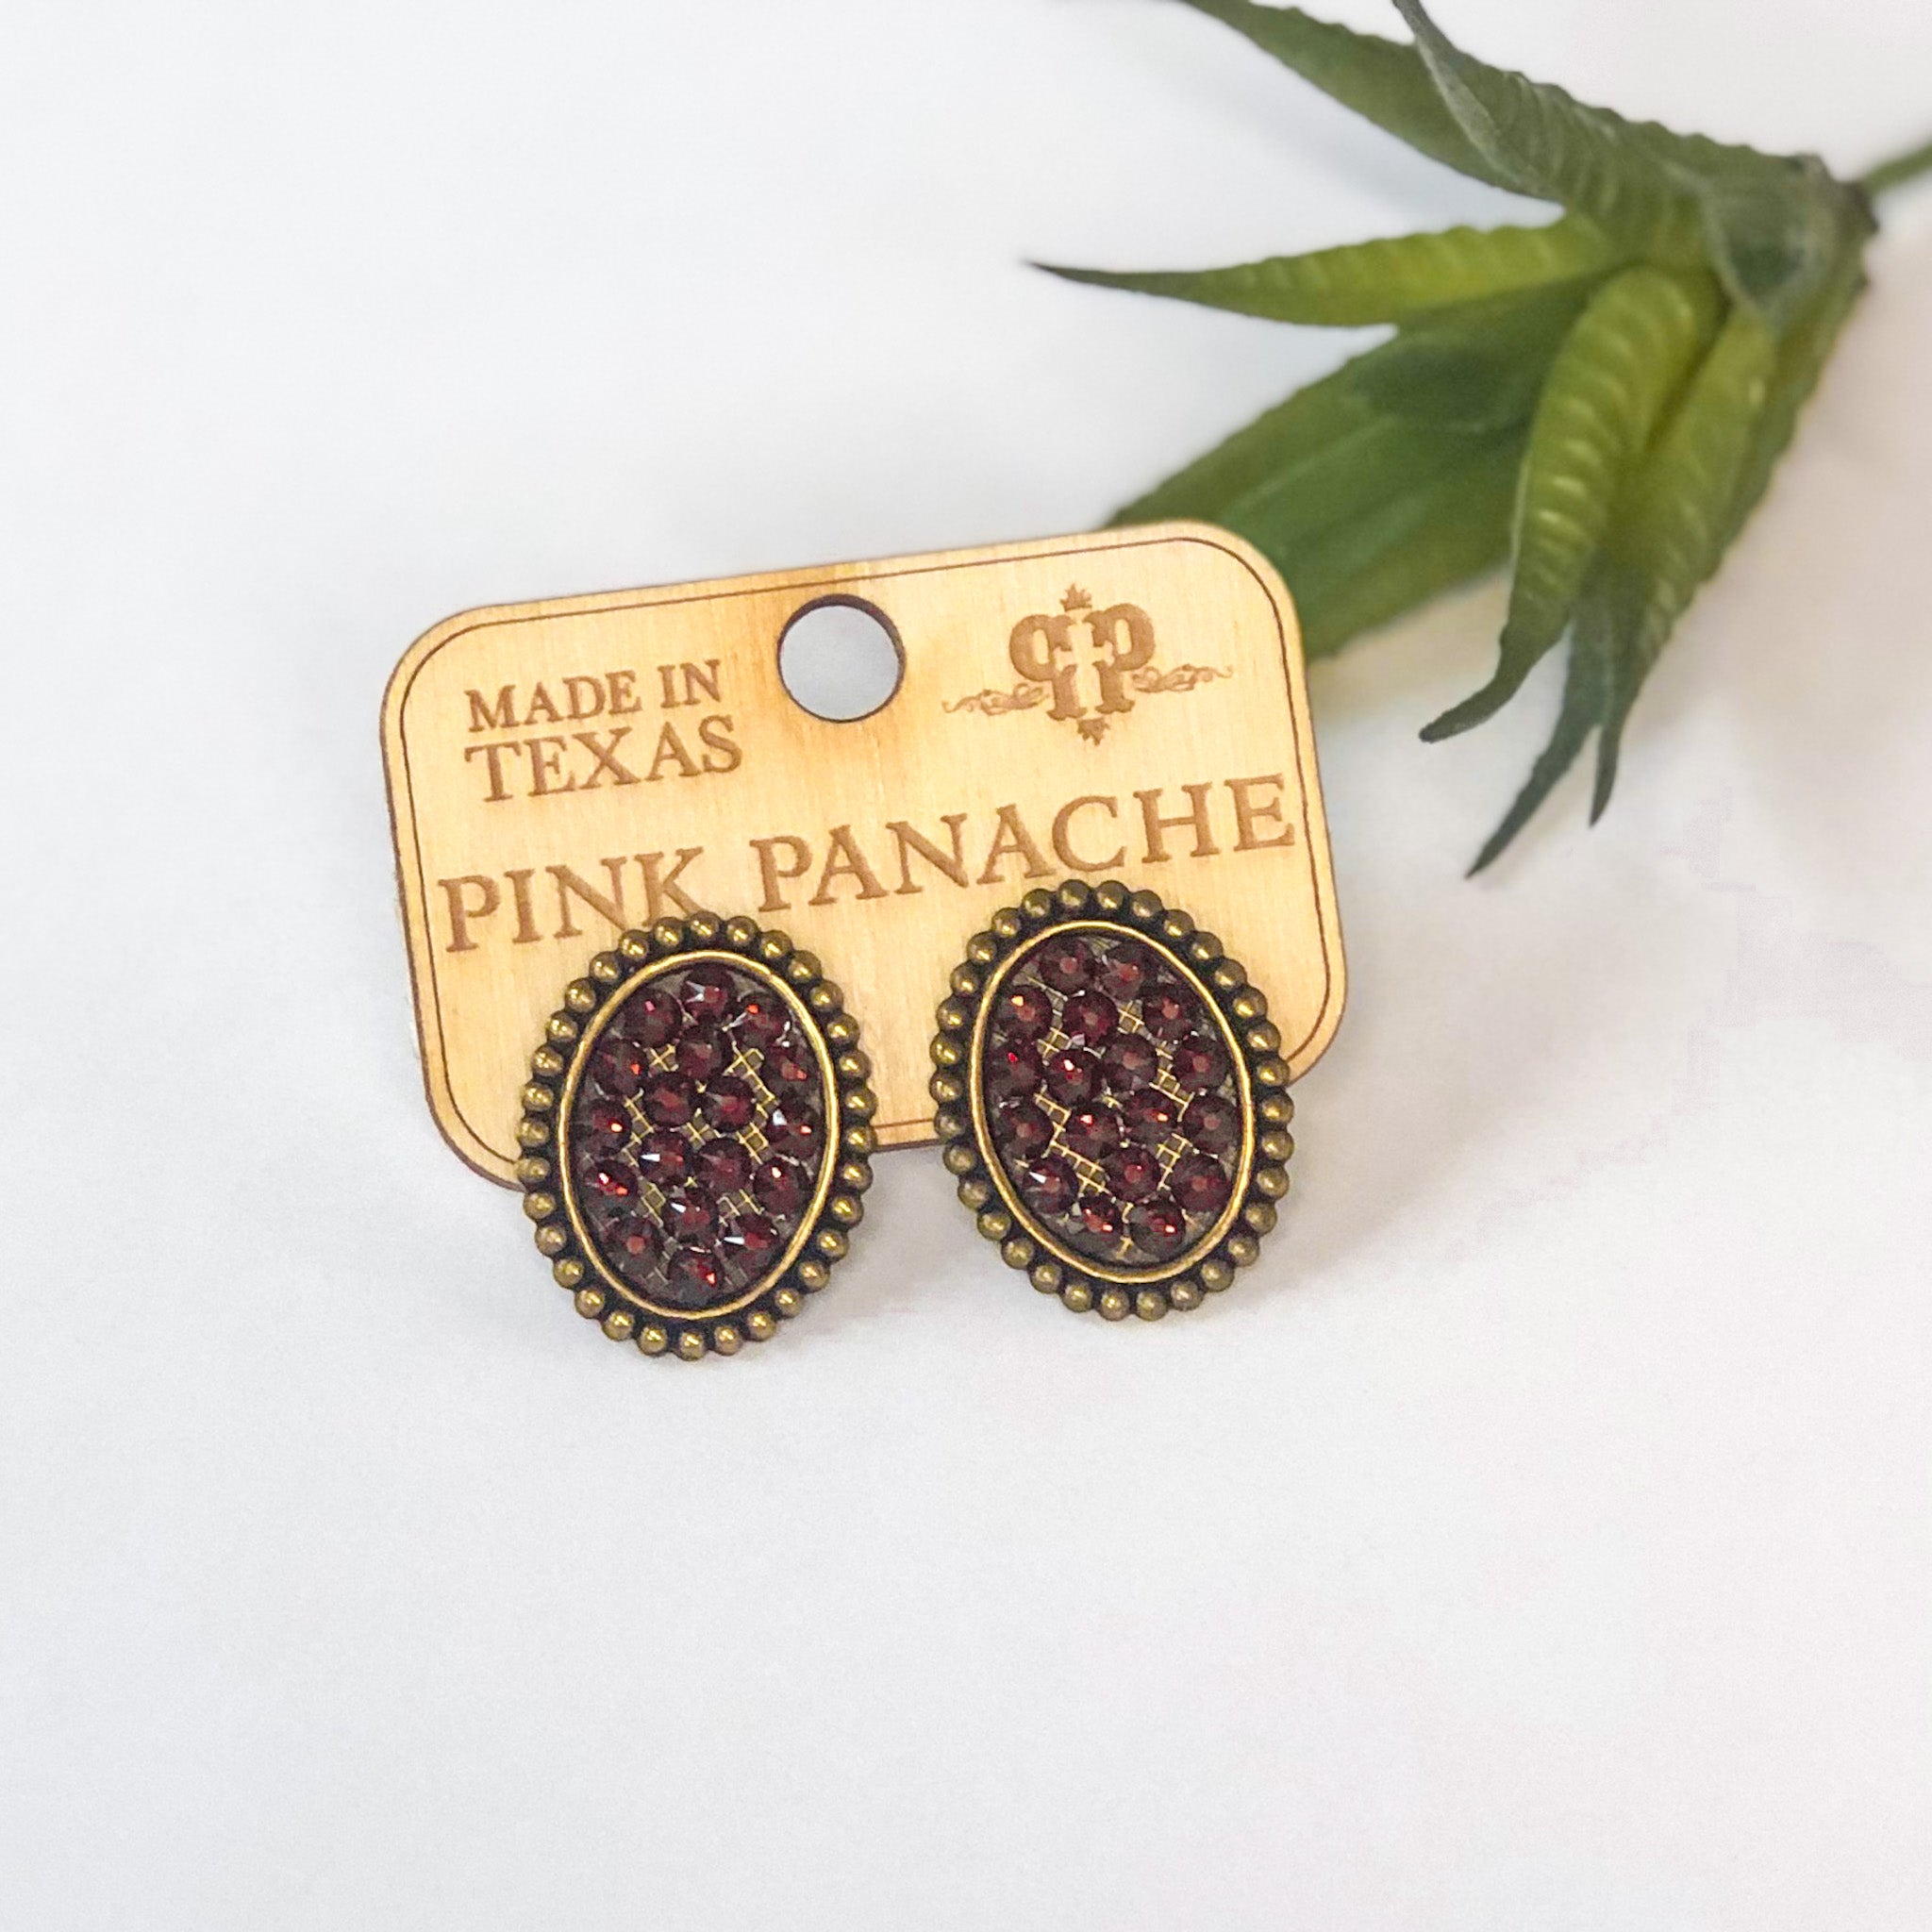 Pink Panache Mini Bronze Oval Stud Earrings with Maroon Crystals - Giddy Up Glamour Boutique